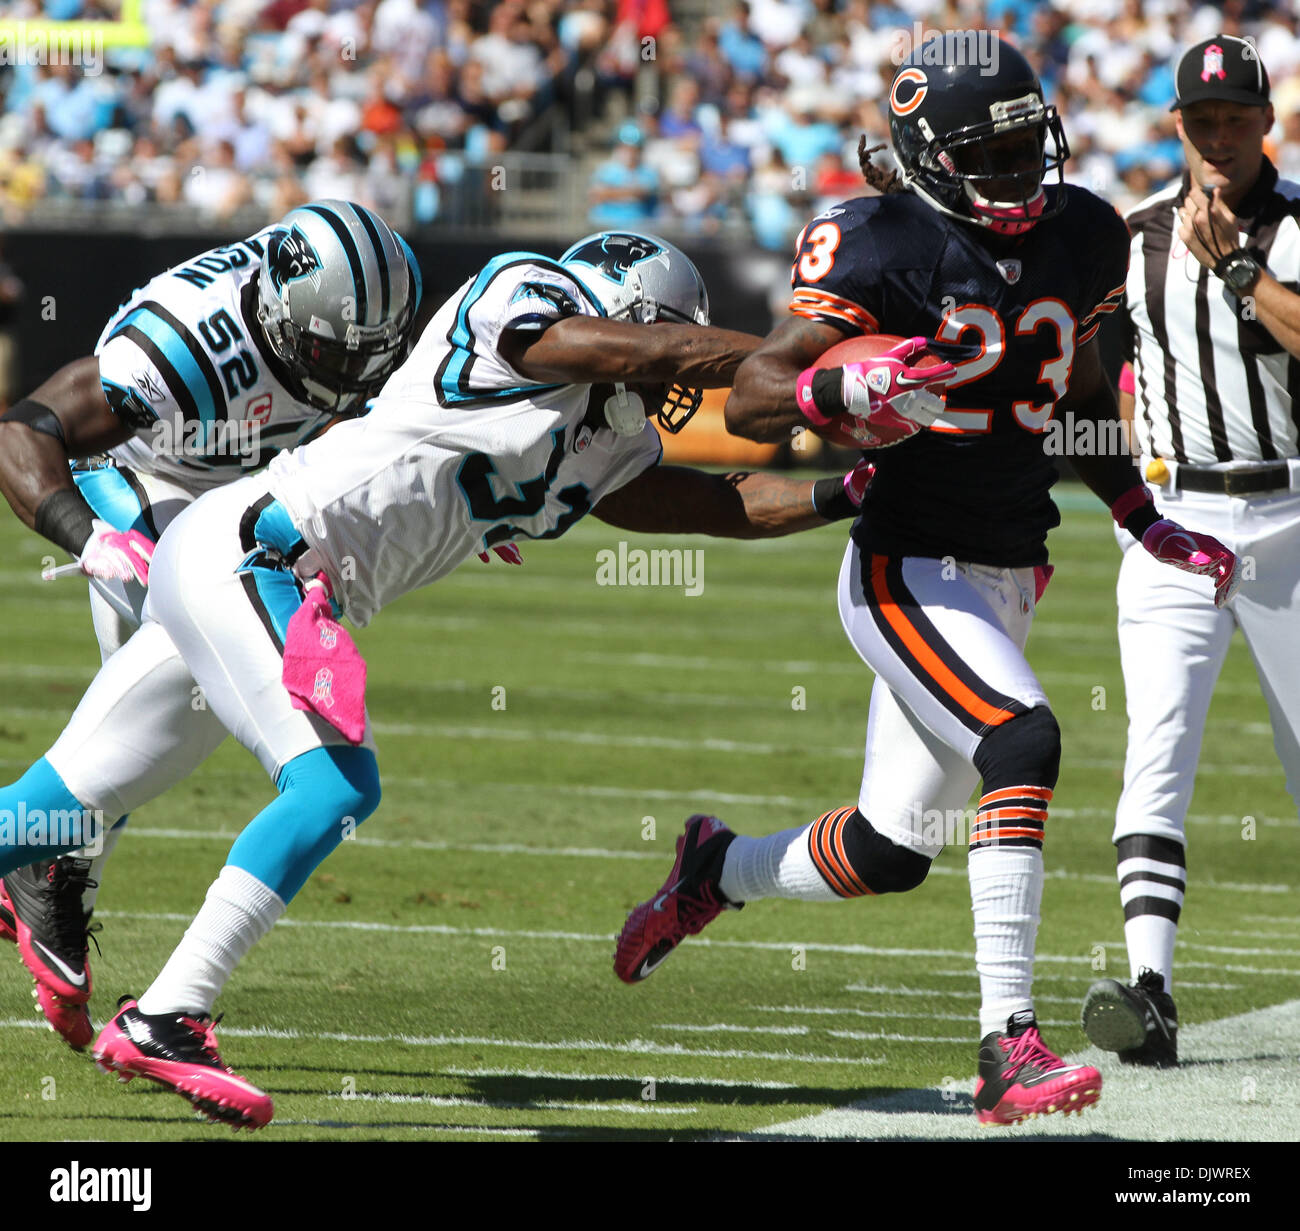 Oct. 10, 2010 - Charlotte, North Carolina, United States of America - Chicago Bears wide receiver Devin Hester (23) runs a punt return back to the Carolina Panther 20 yard line, setting up the Bears' second touchdown. The Bears lead the Panthers 17-3 at the half in the game at Bank of America Stadium. (Credit Image: © Margaret Bowles/Southcreek Global/ZUMApress.com) Stock Photo